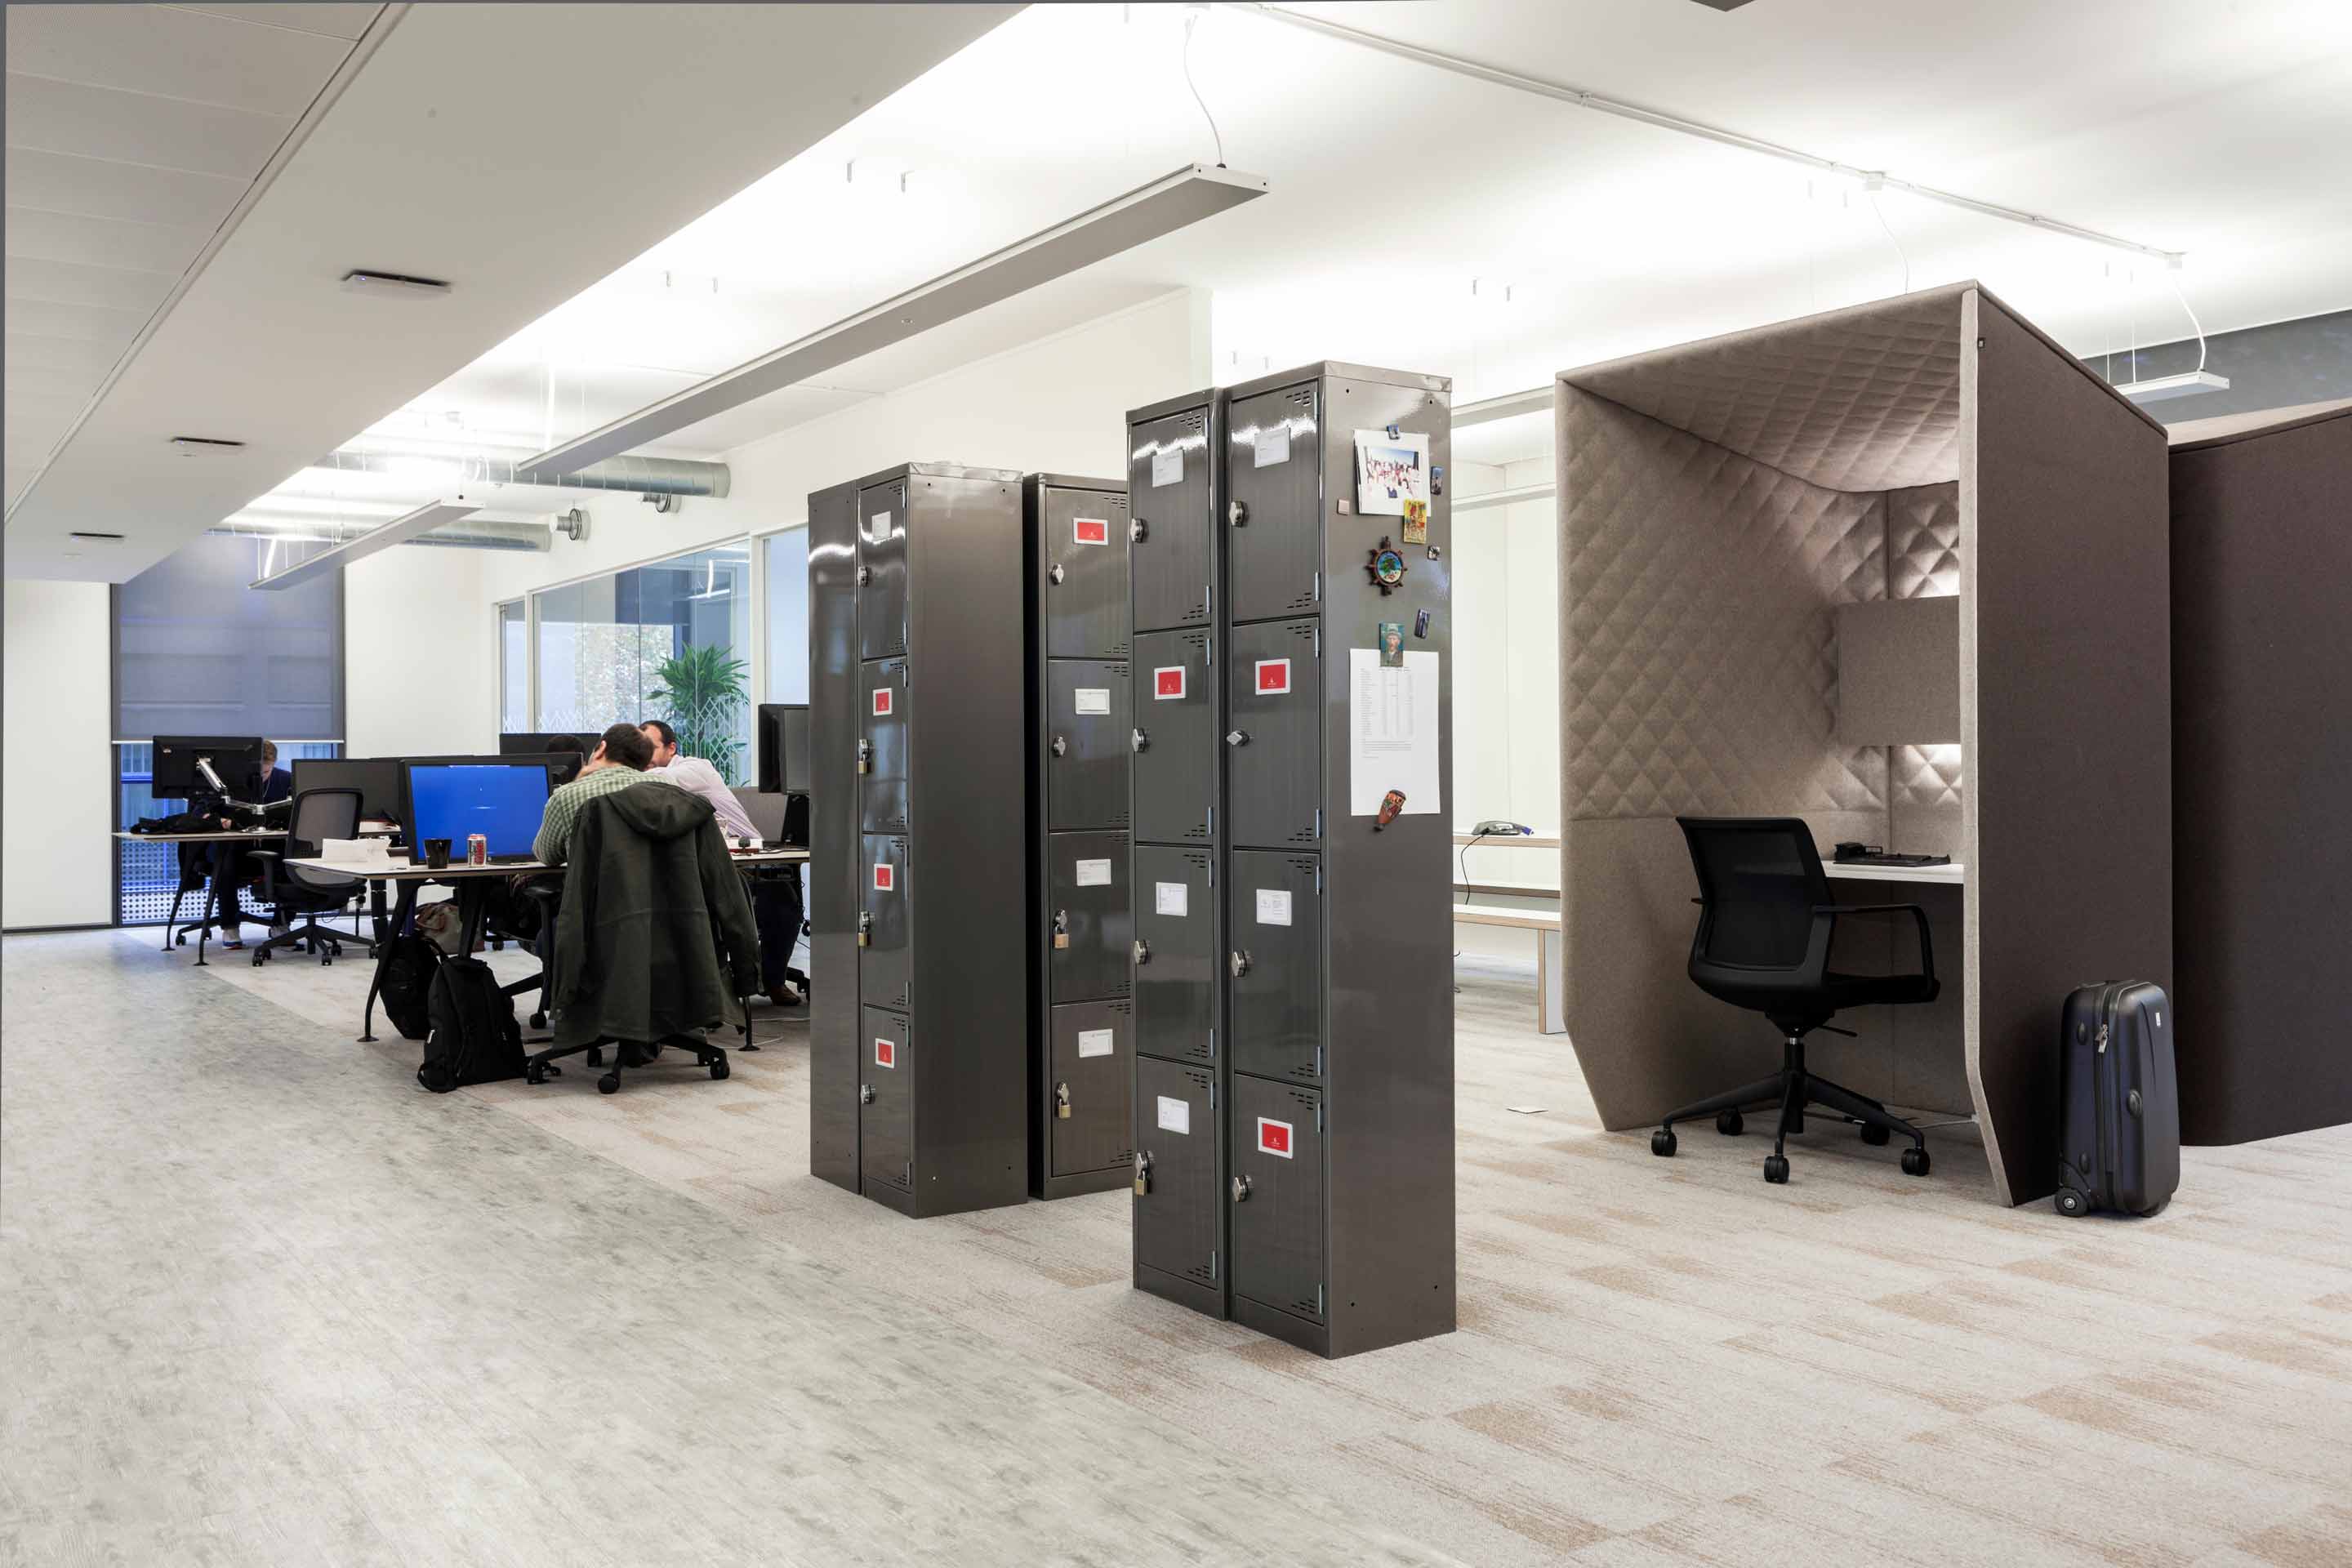 Black metal lockers located in the centre of an open office area with a fabric pod on the right and white desk spaces on the opposite side of the room